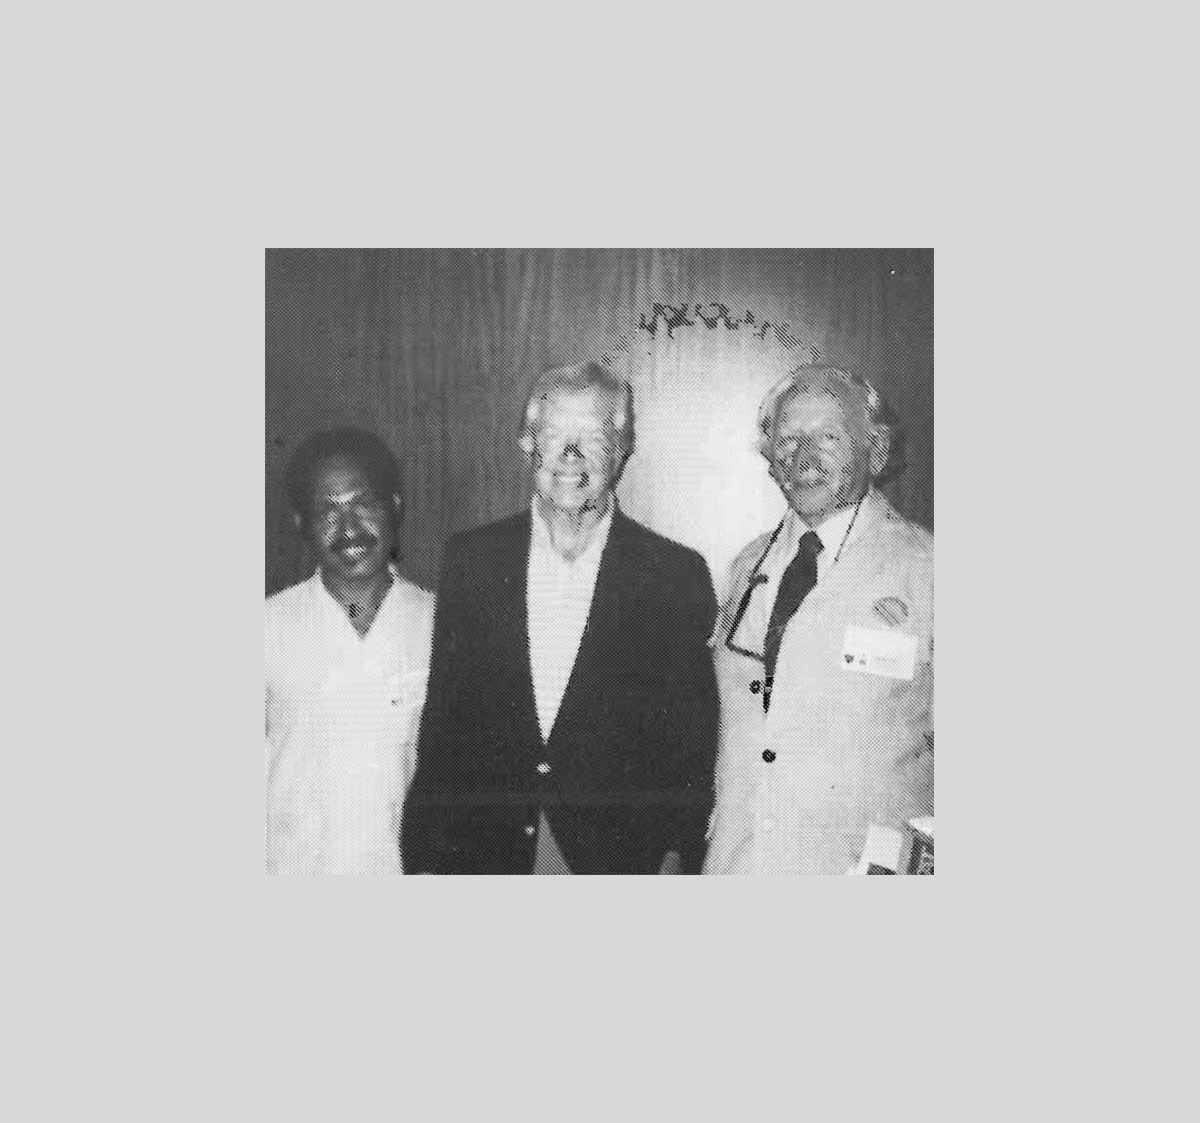 charles lapa, former President of the United States Jimmy Carter and Dr Fergusson